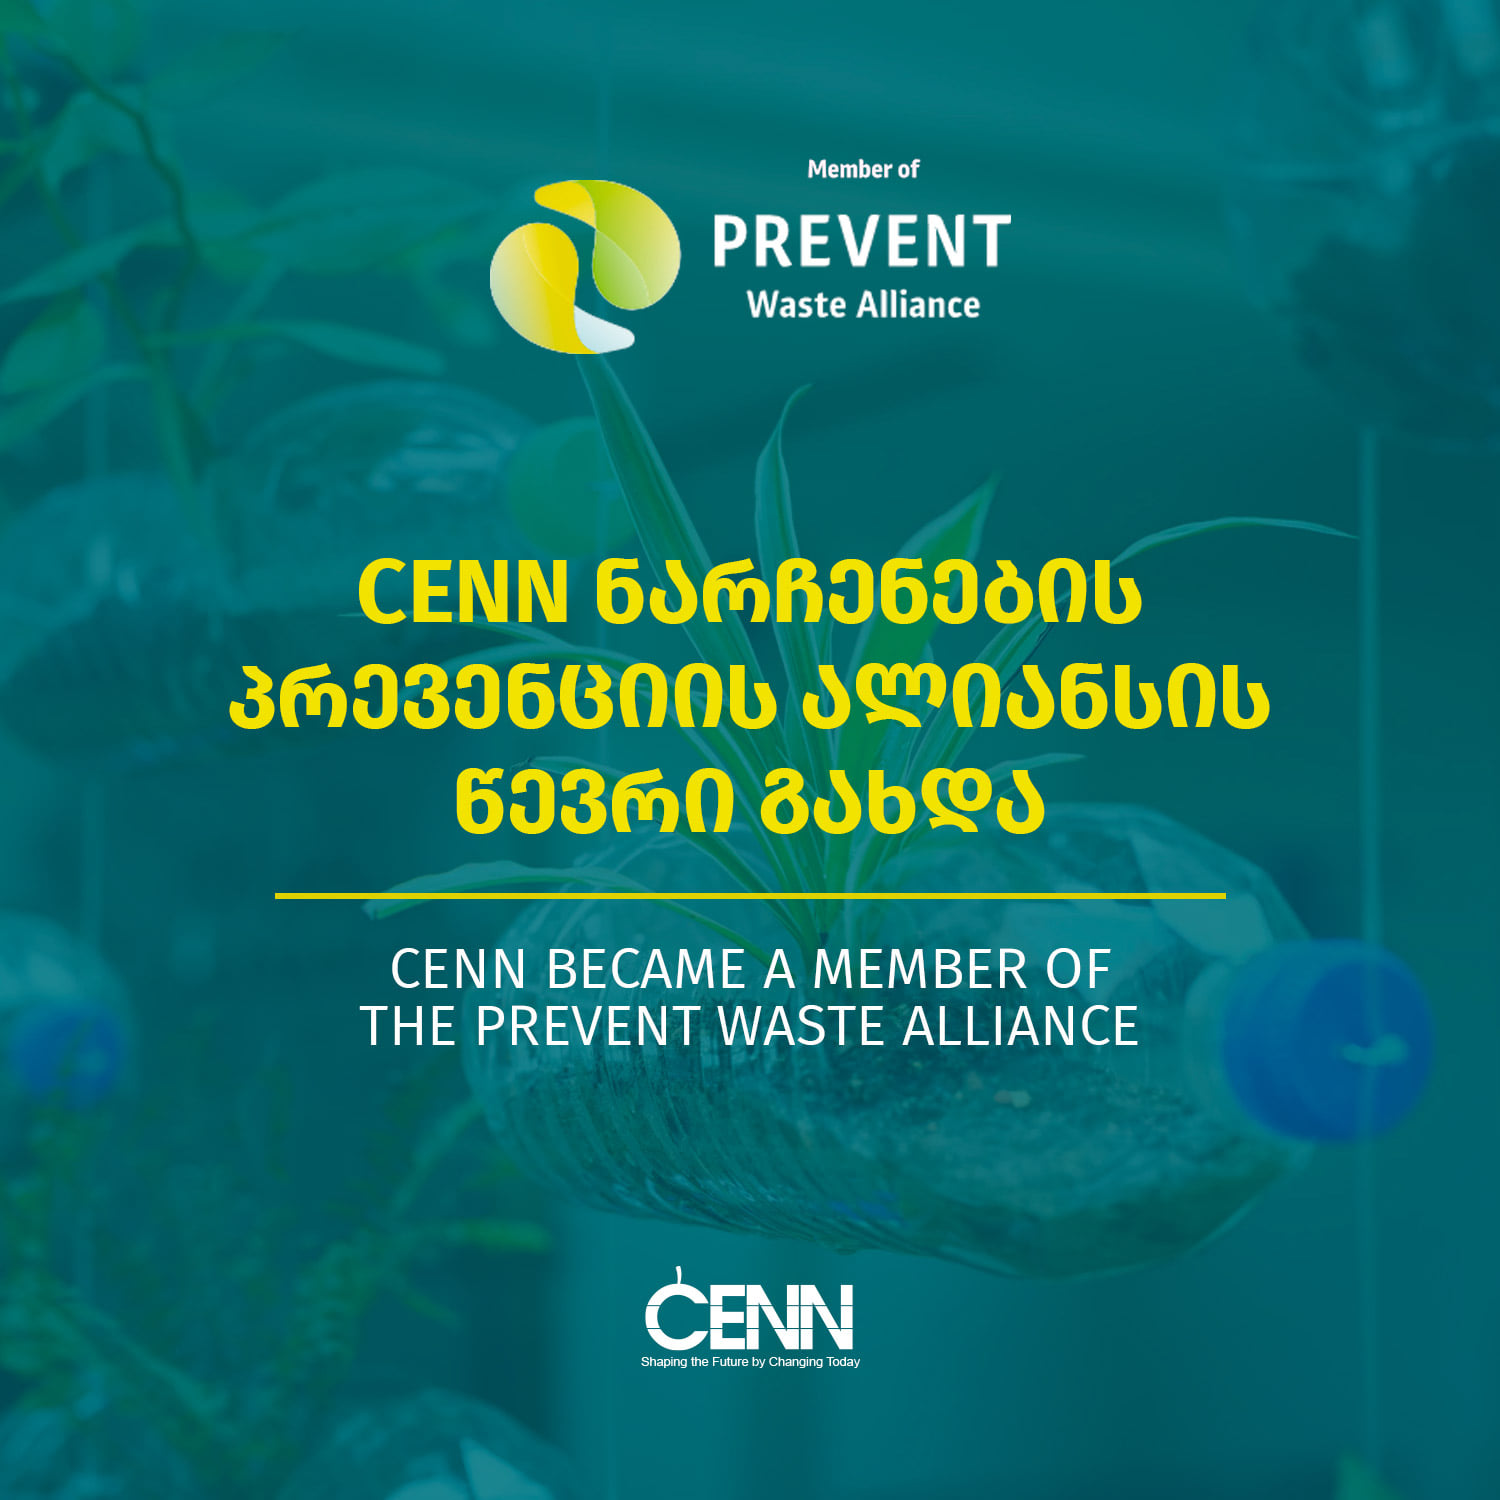 CENN Becomes a Member of Prevent Waste Alliance